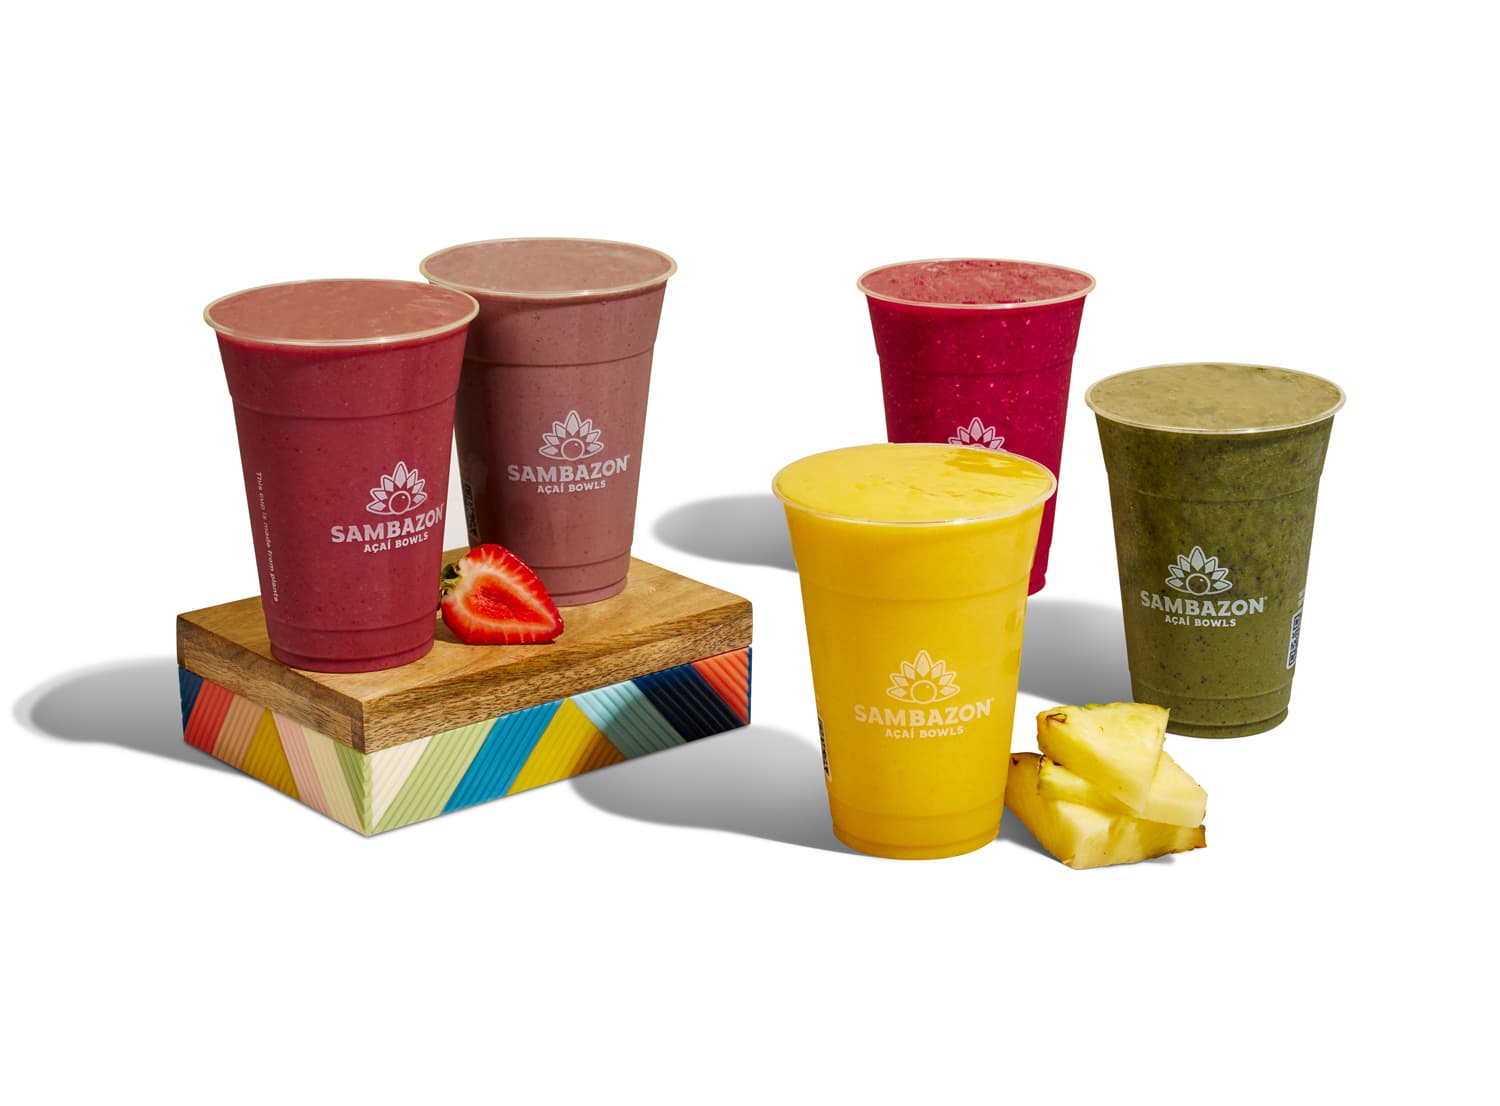 SAMBAZON Smoothies being showcased with colorful fruit and a colorful box